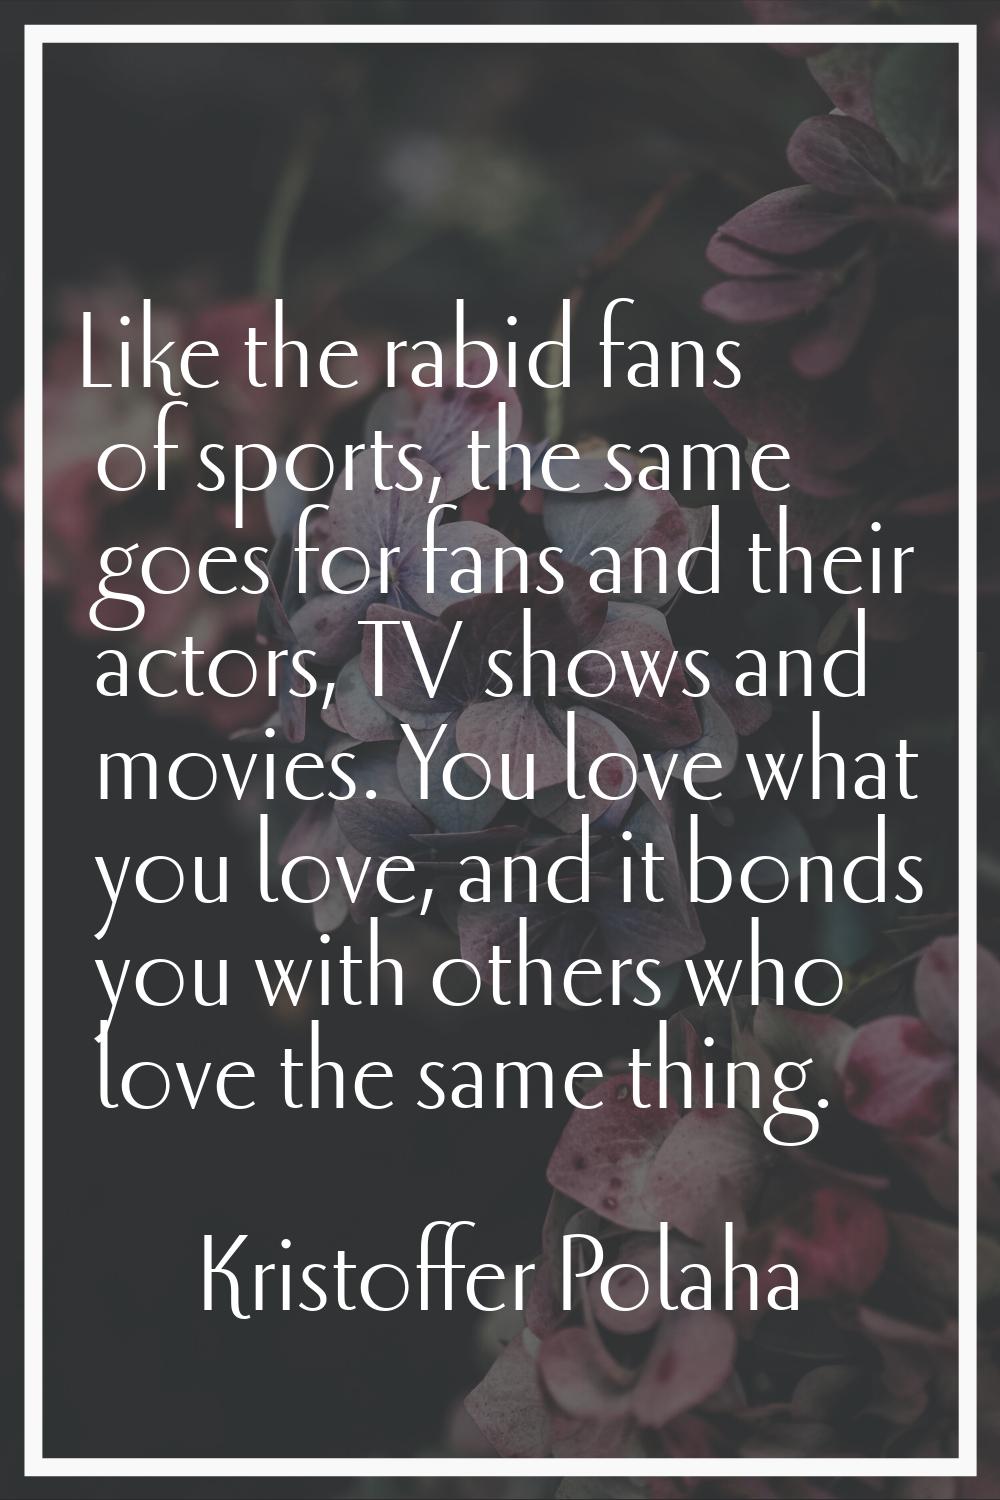 Like the rabid fans of sports, the same goes for fans and their actors, TV shows and movies. You lo